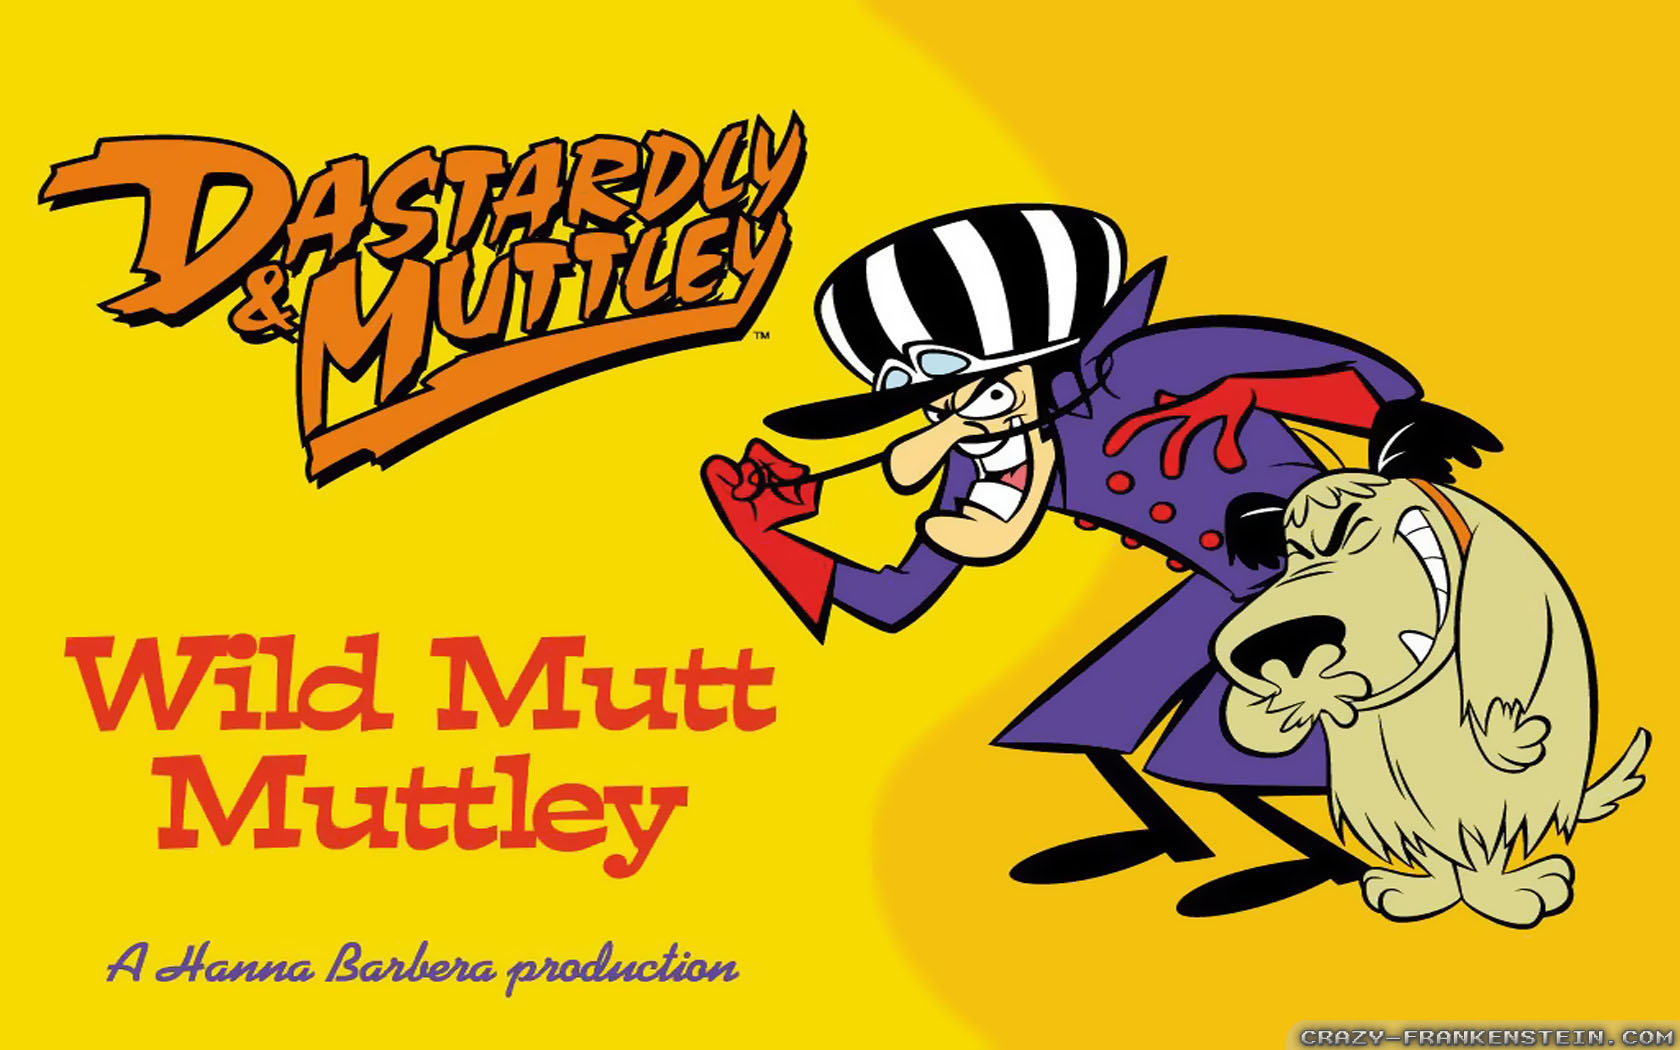 Dastardly & Muttley Backgrounds, Compatible - PC, Mobile, Gadgets| 1680x1050 px